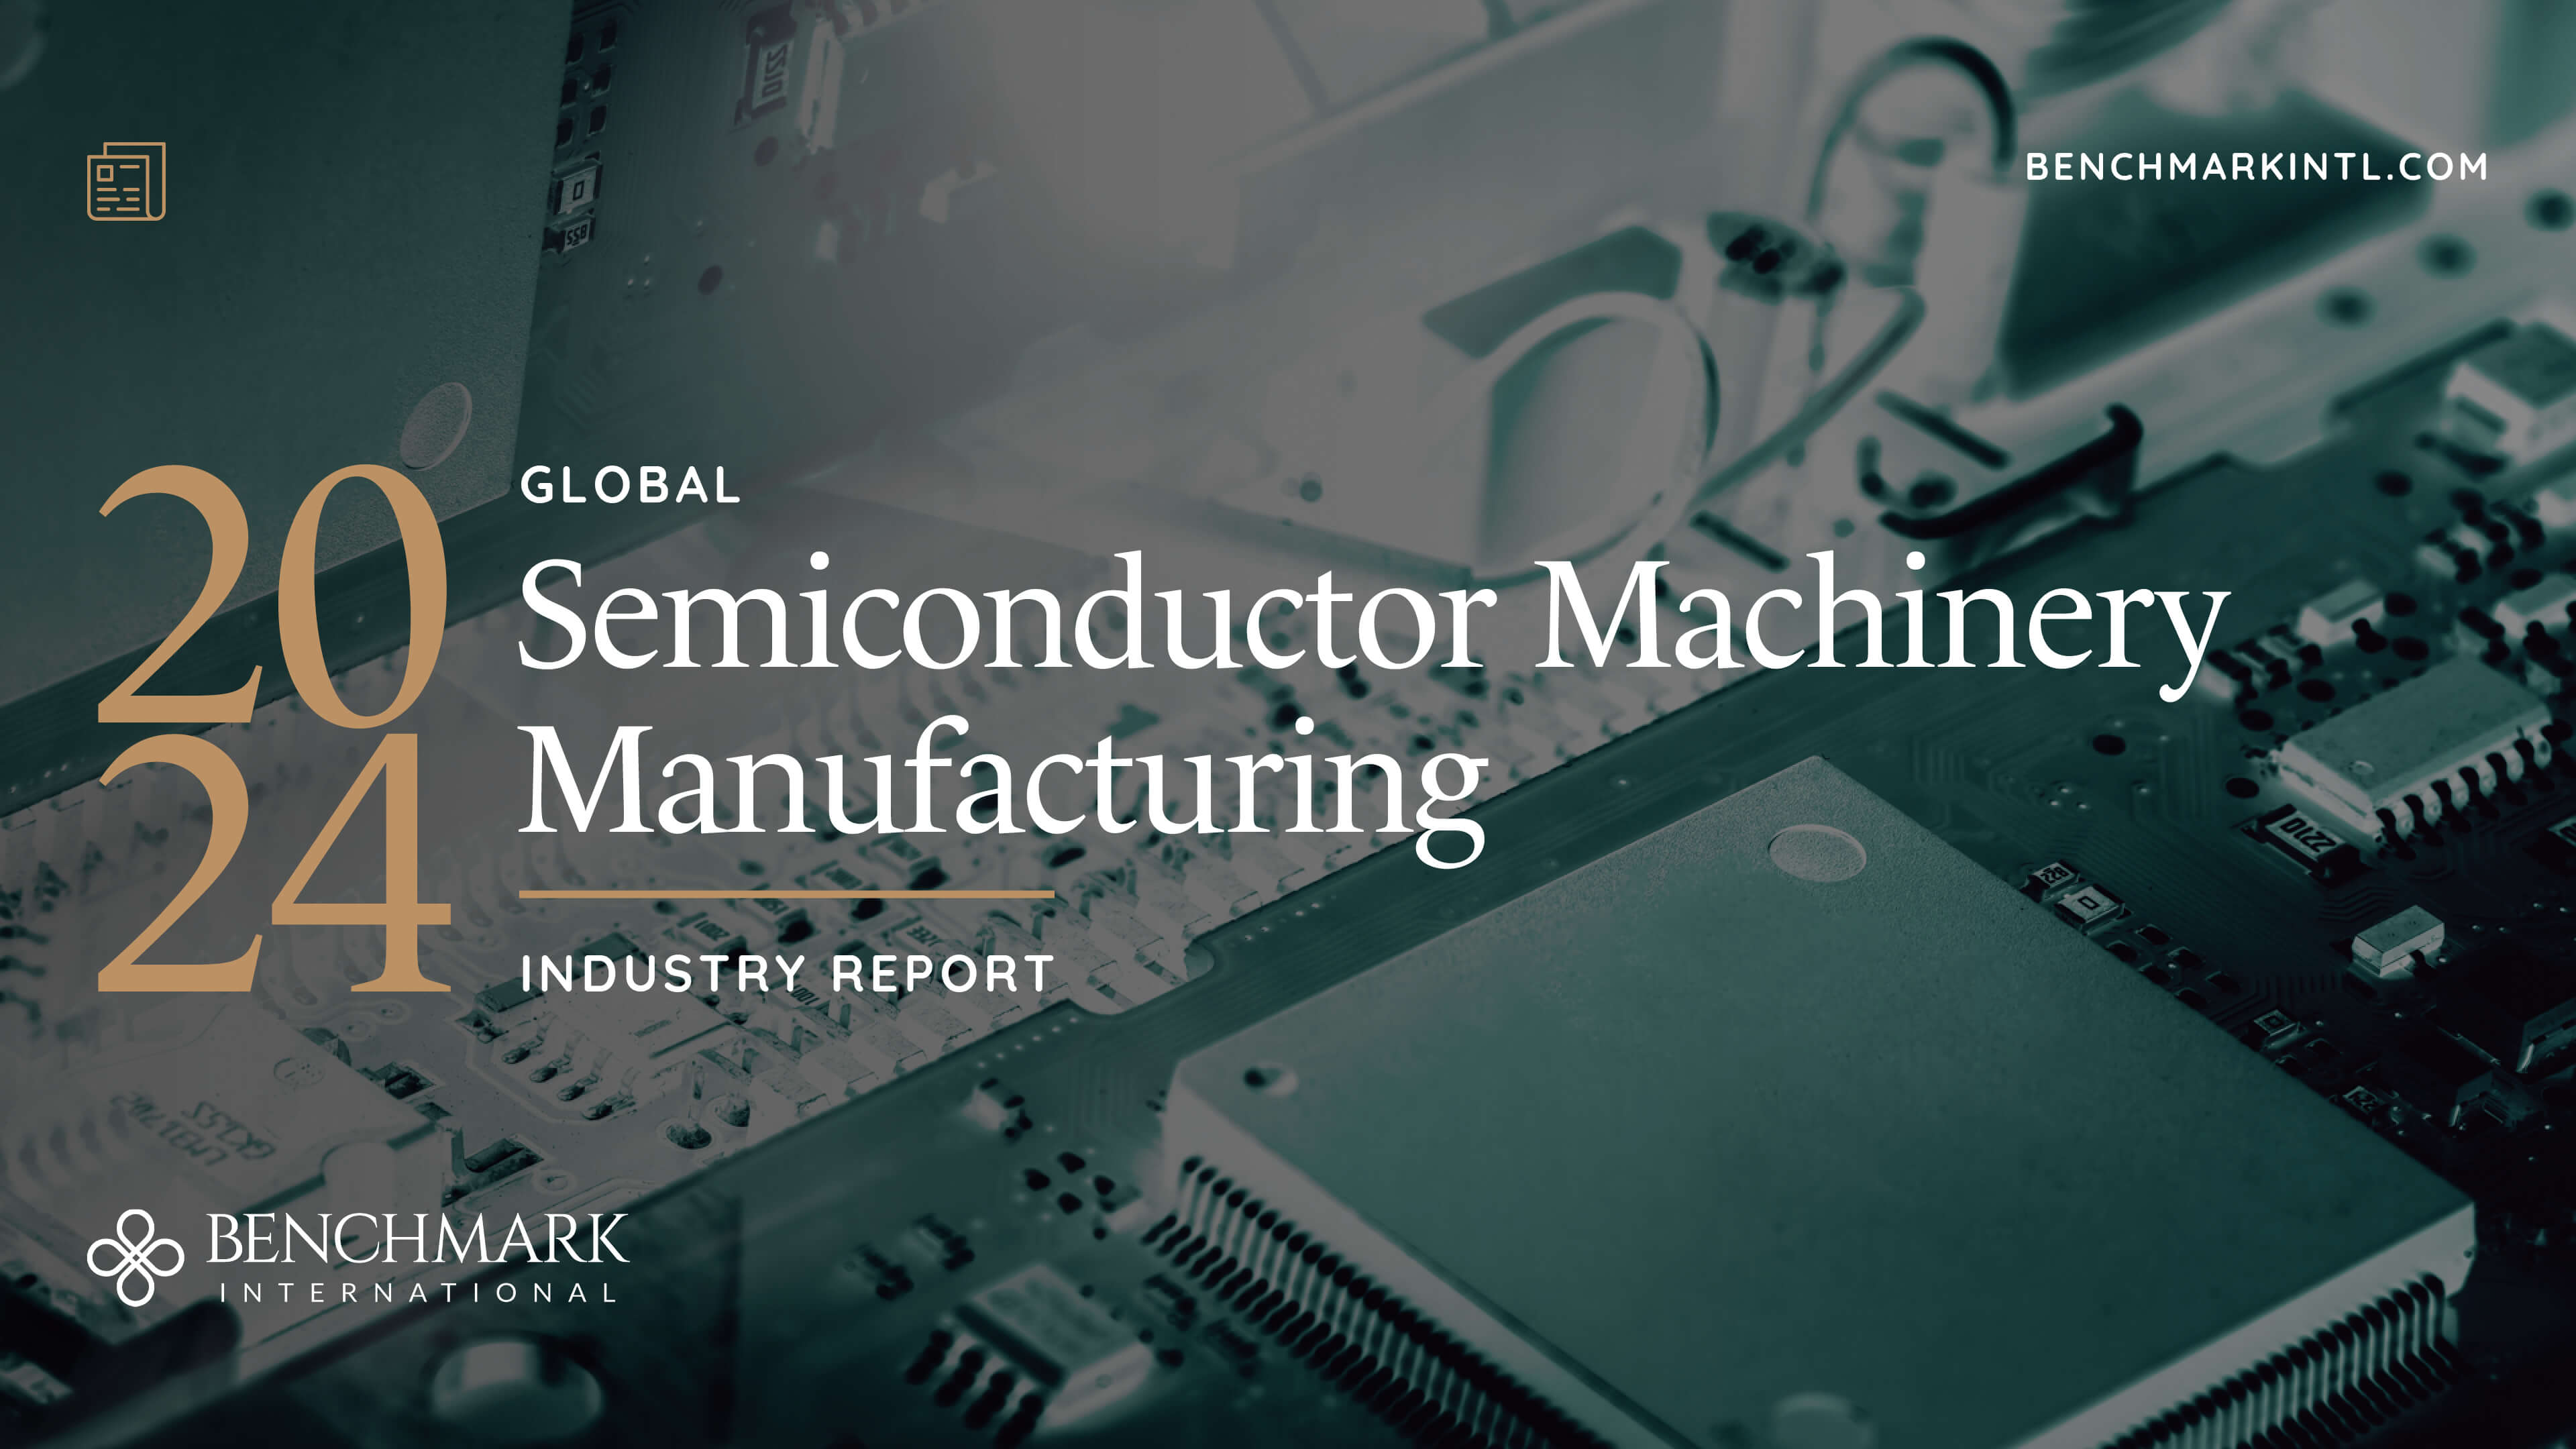 Global Semiconductor Machinery Manufacturing Industry Report